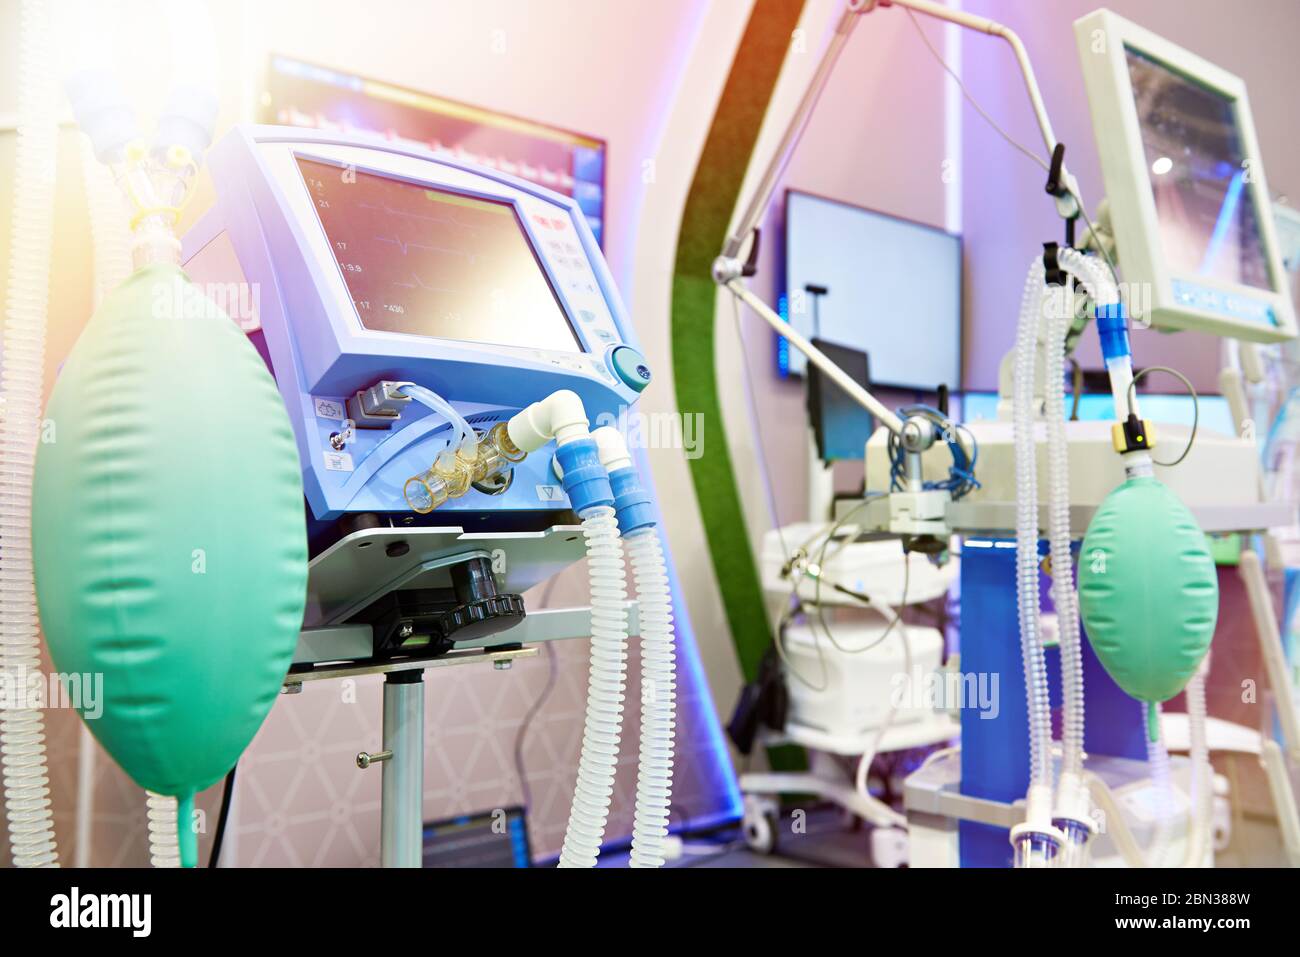 Medical equipment at the exhibition Stock Photo